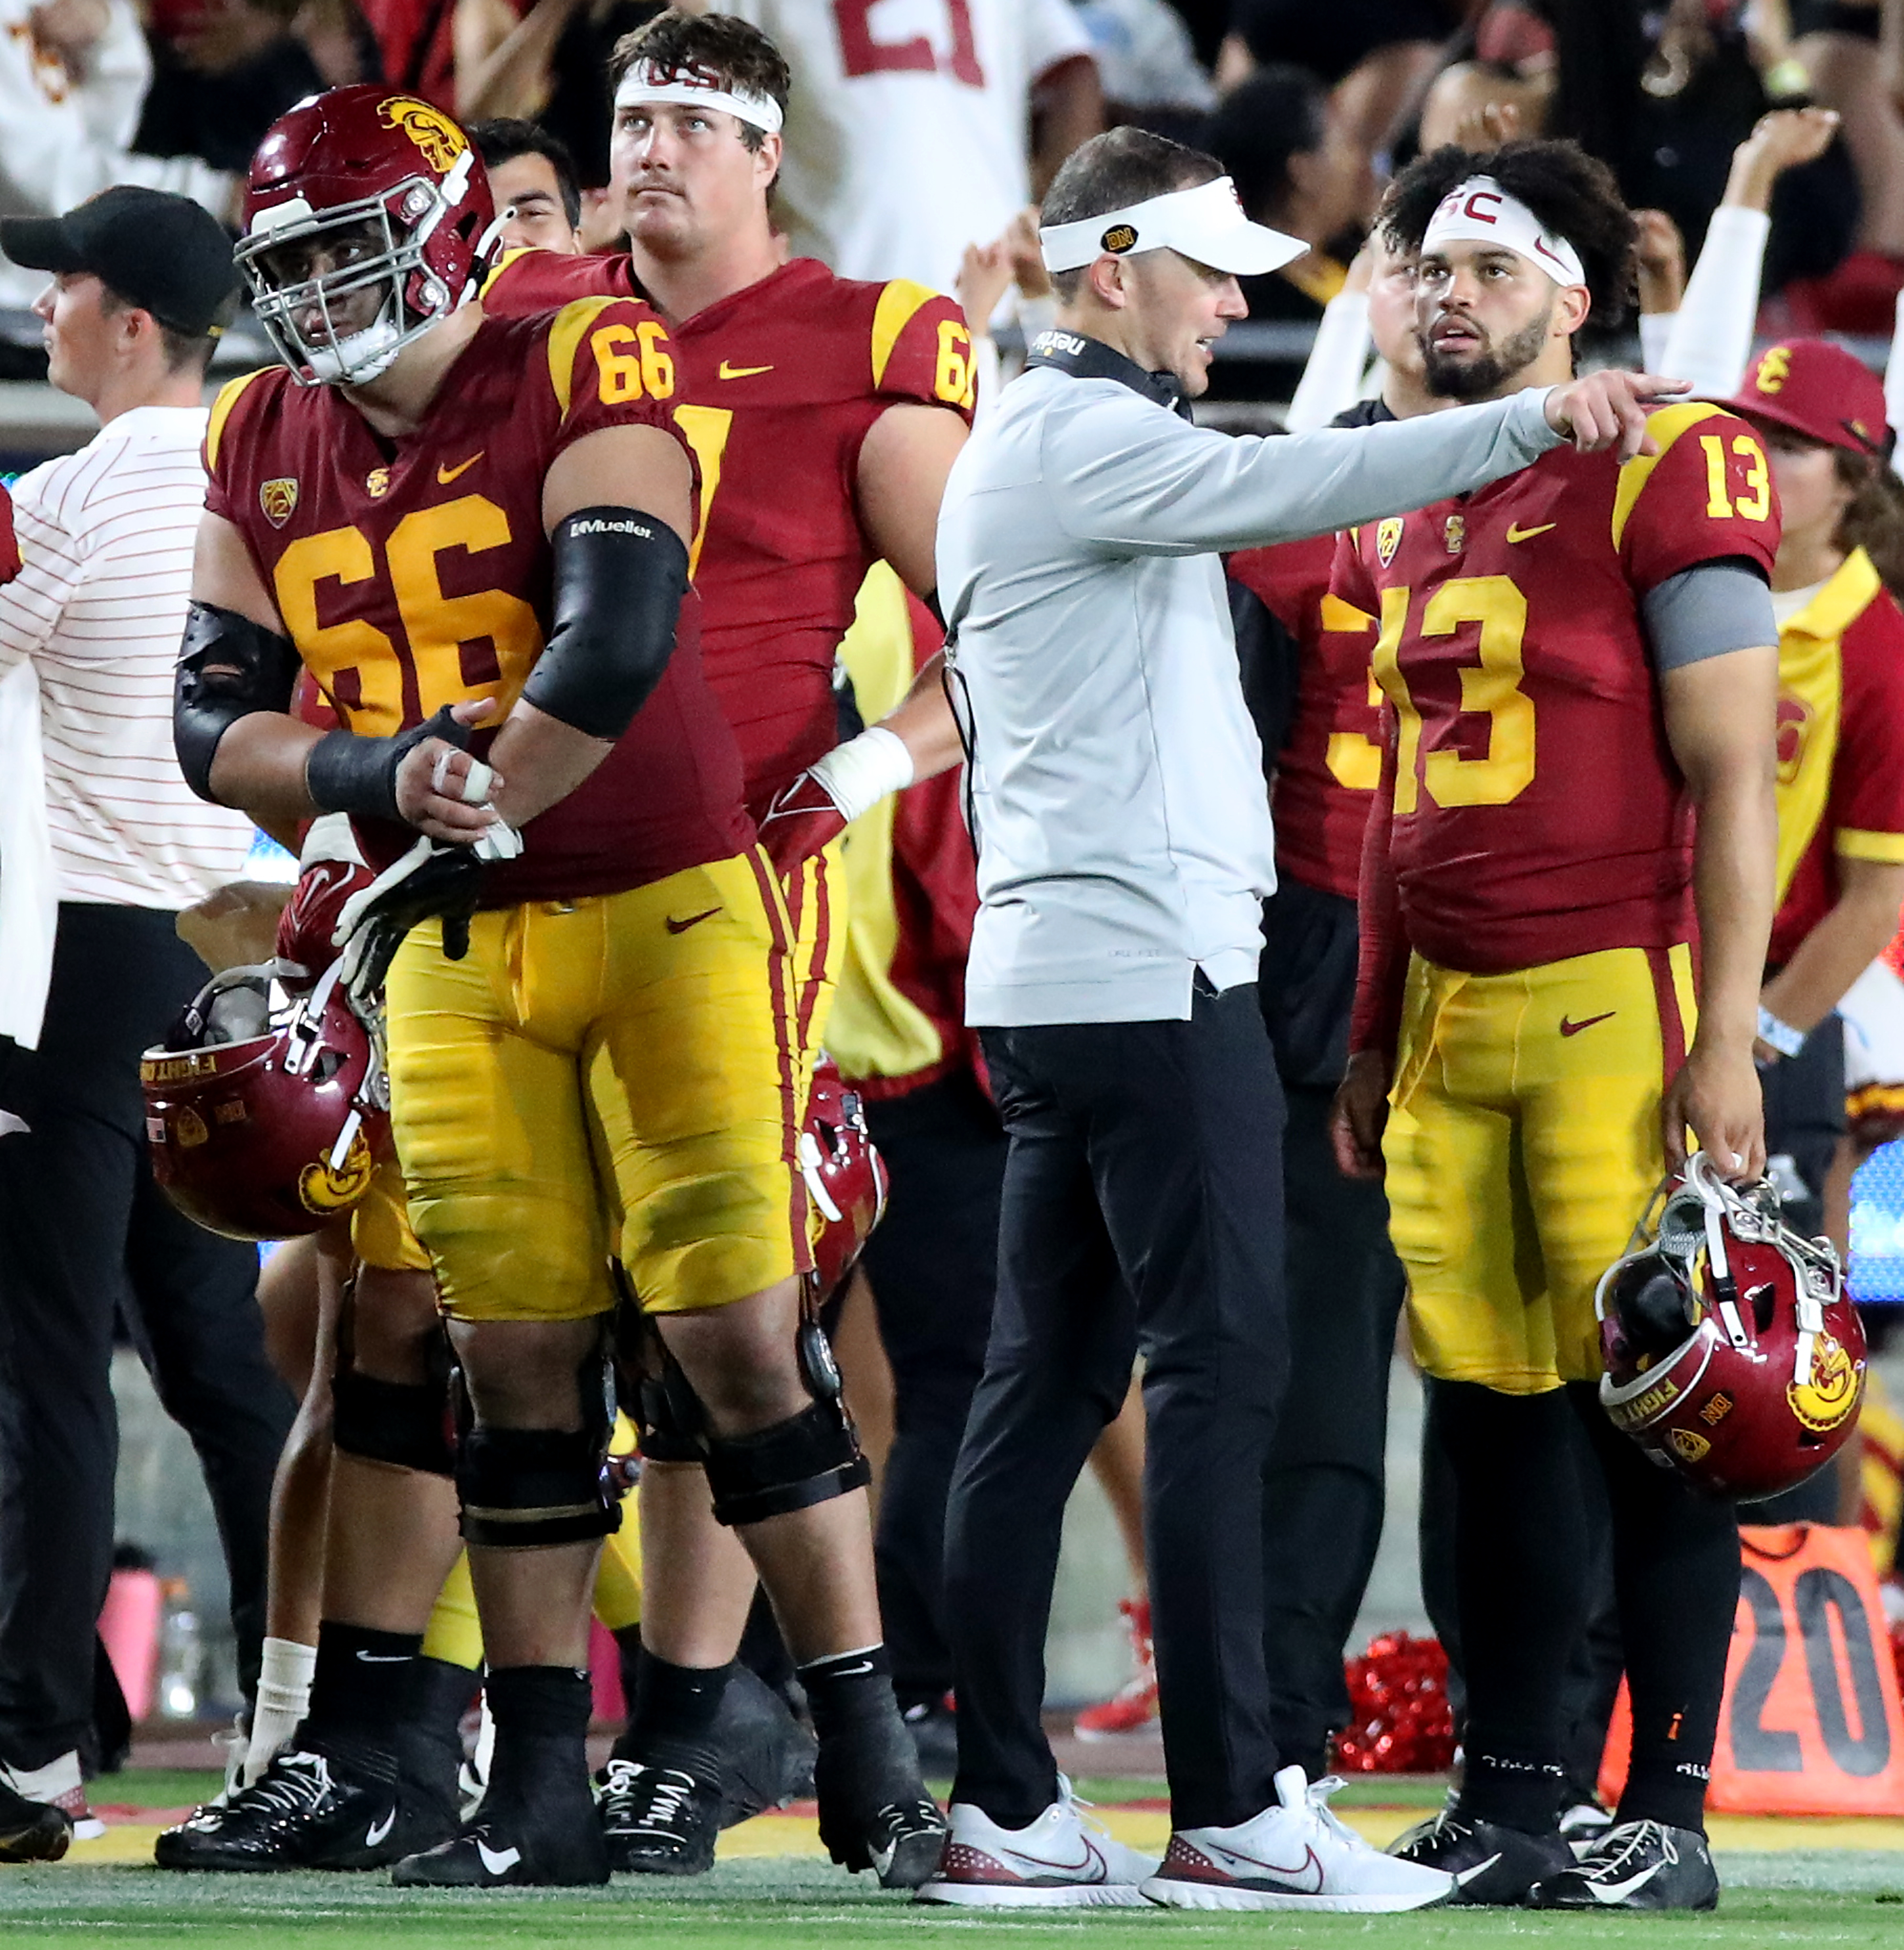 column: usc star caleb williams rebounded against arizona state. is he ready for bigger tests?